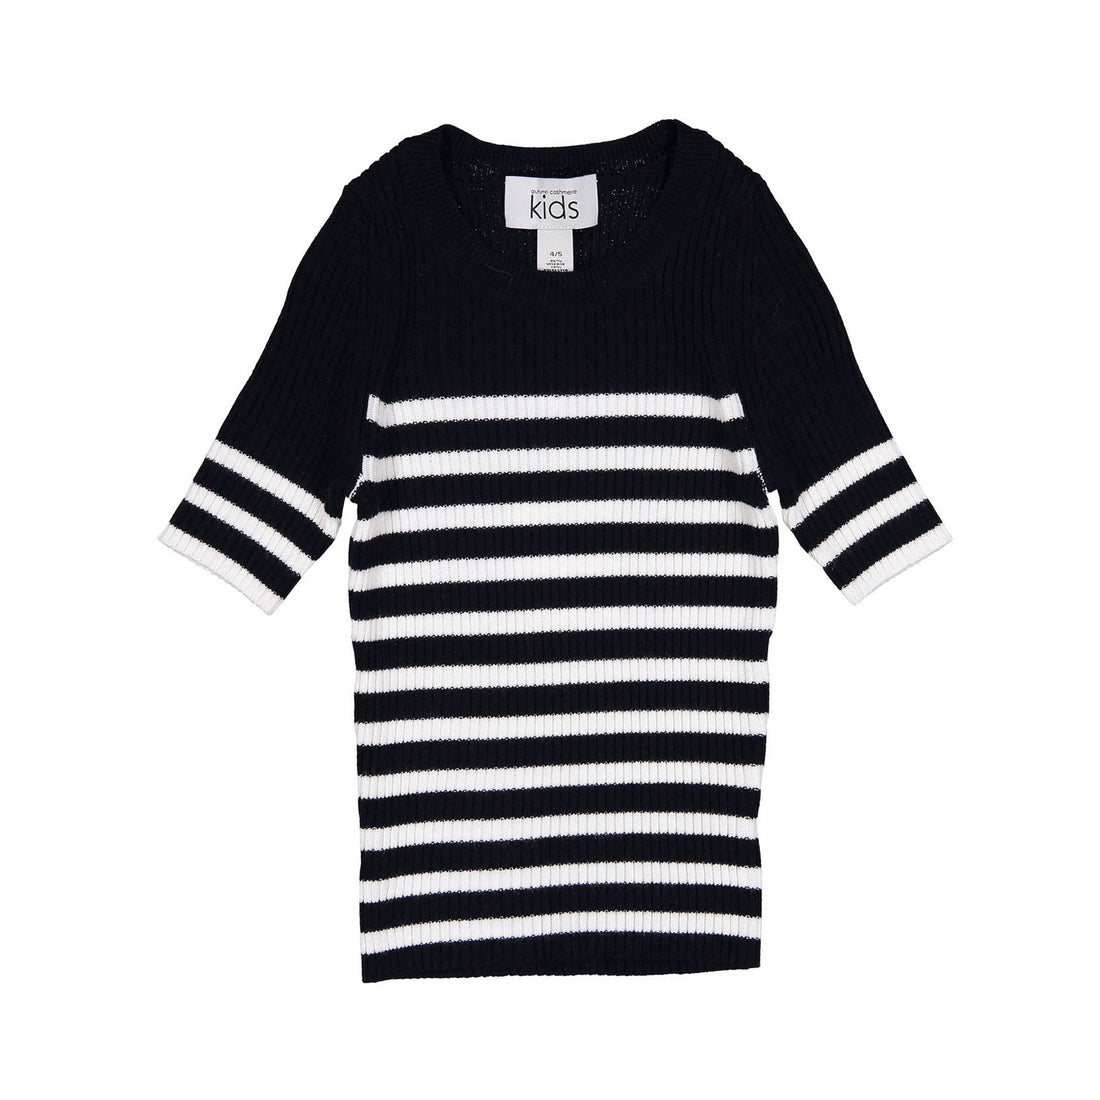 Autumn Cashmere Navy Ribbed Striped Tee